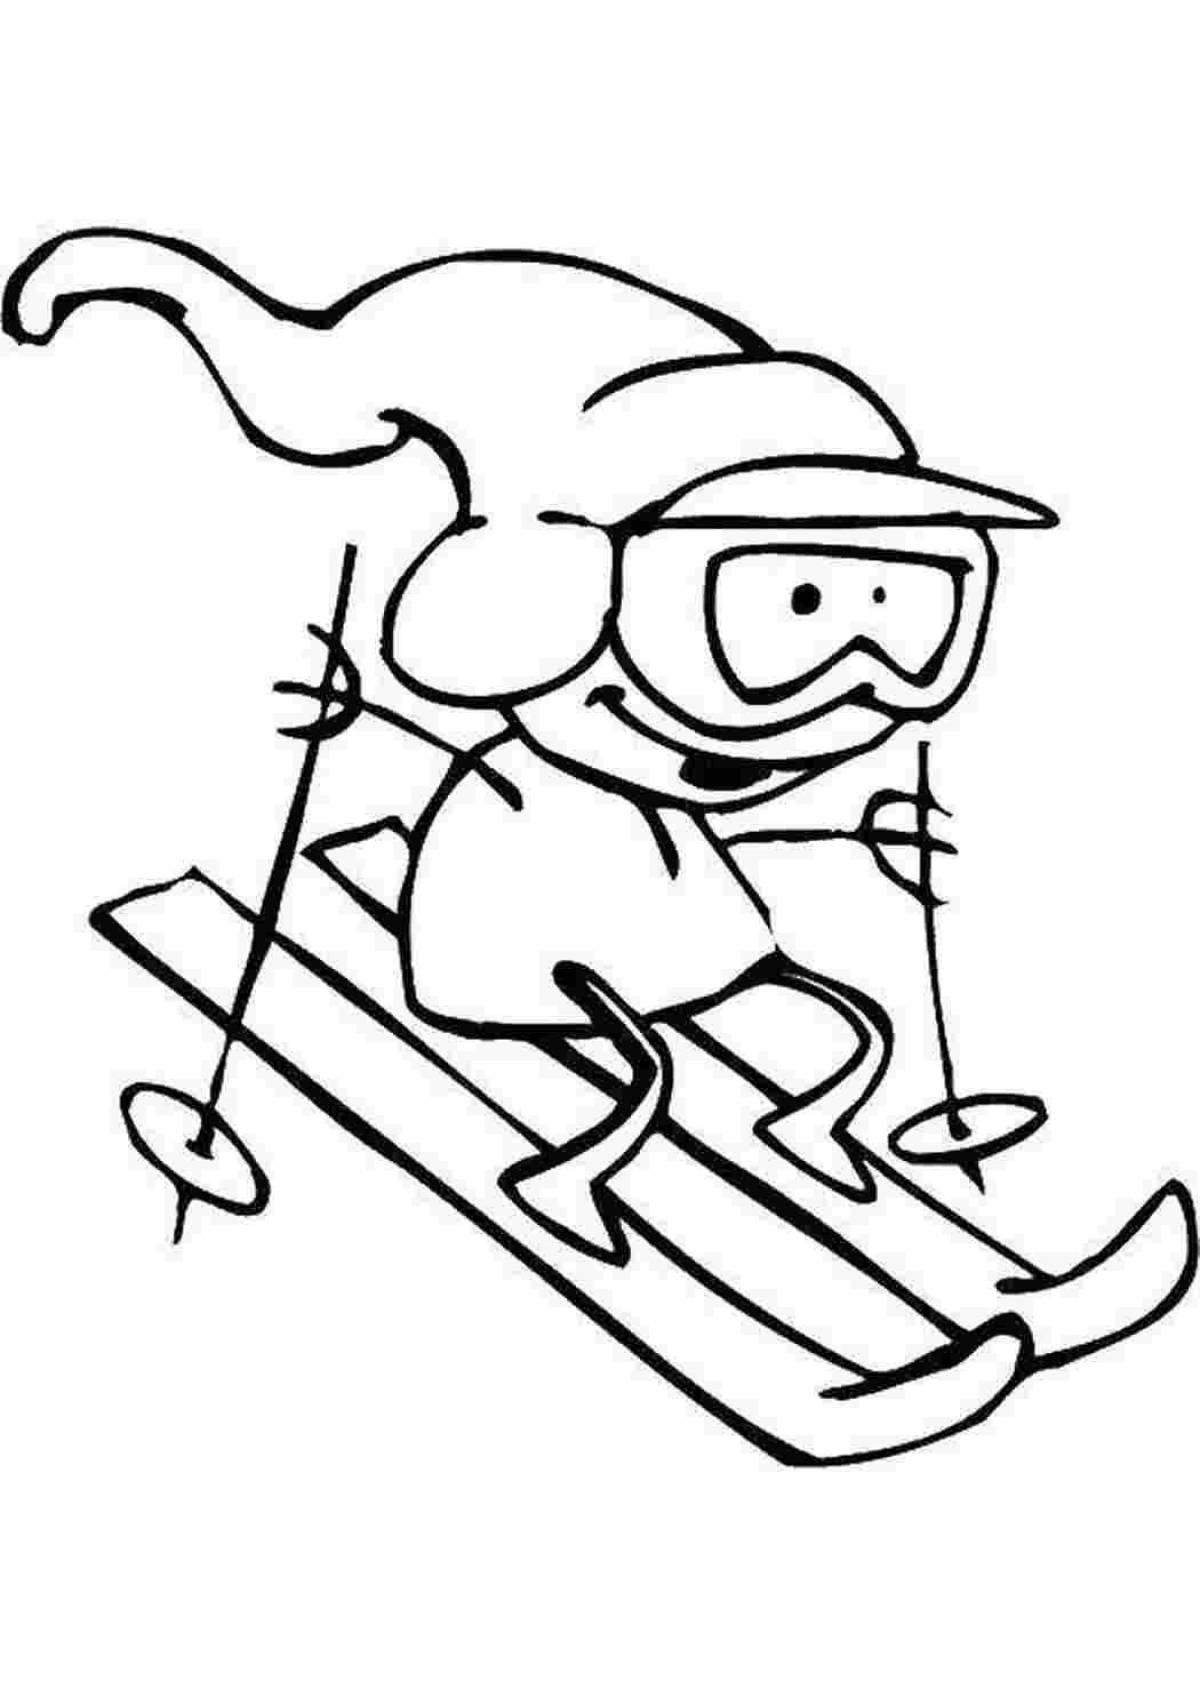 Animated skiing coloring book